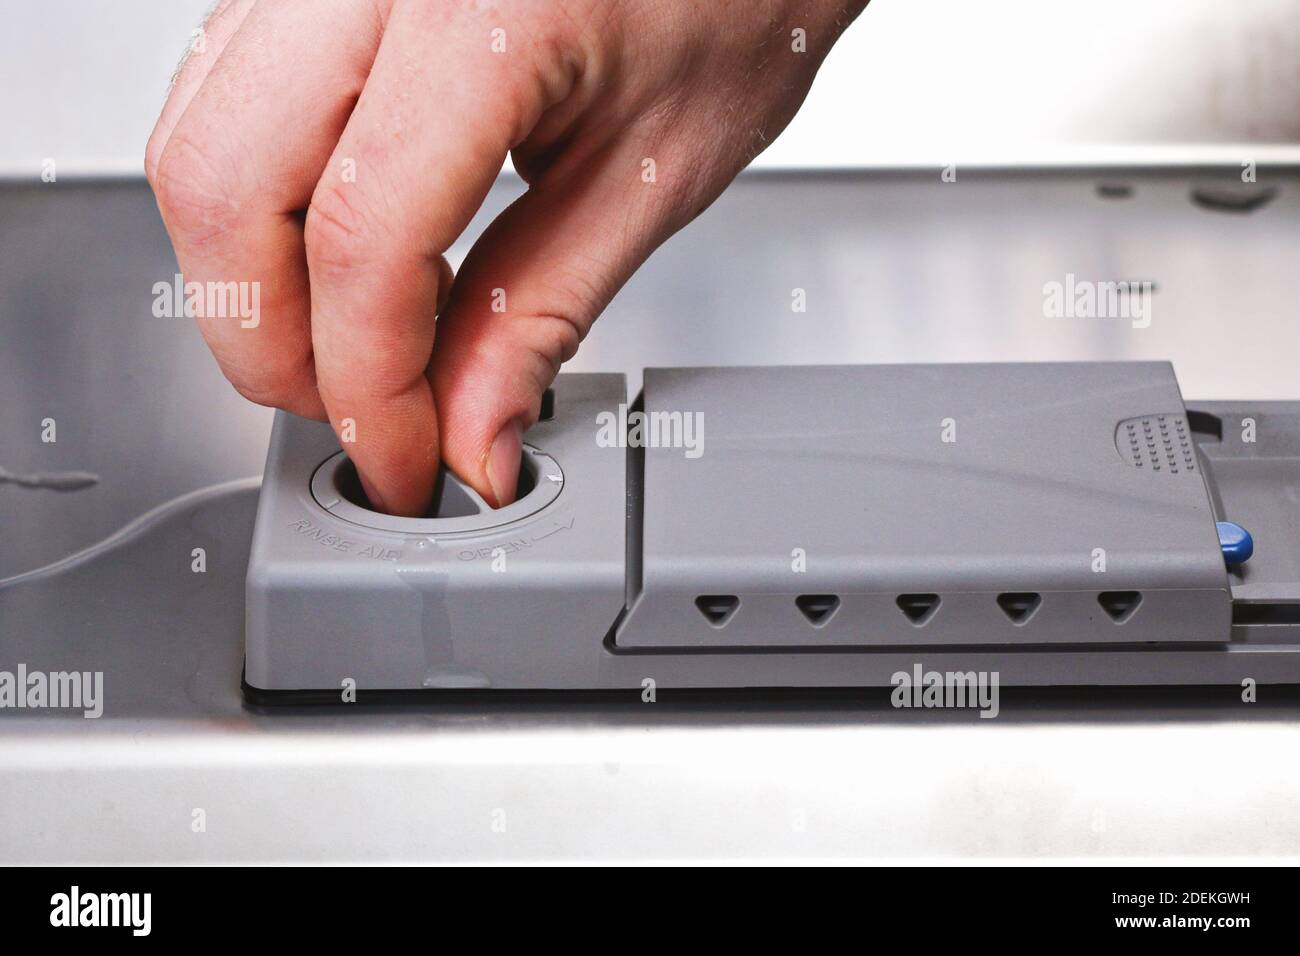 A man pours a rinse aid into the dishwasher compartment Stock Photo - Alamy